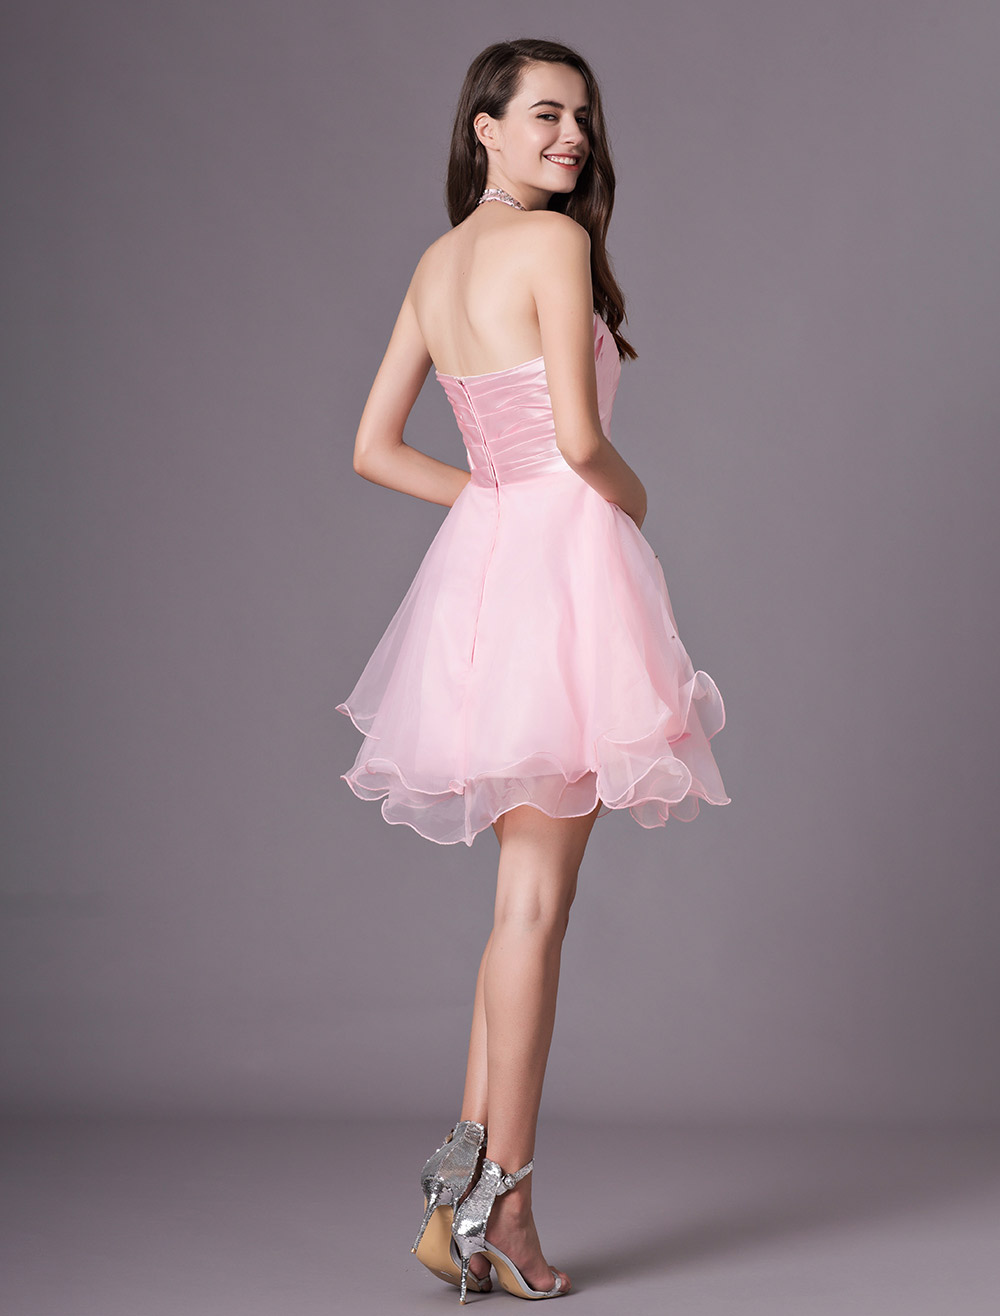 Short Pink Halter Homecoming Dress with Tulle Skirt - Milanoo.com